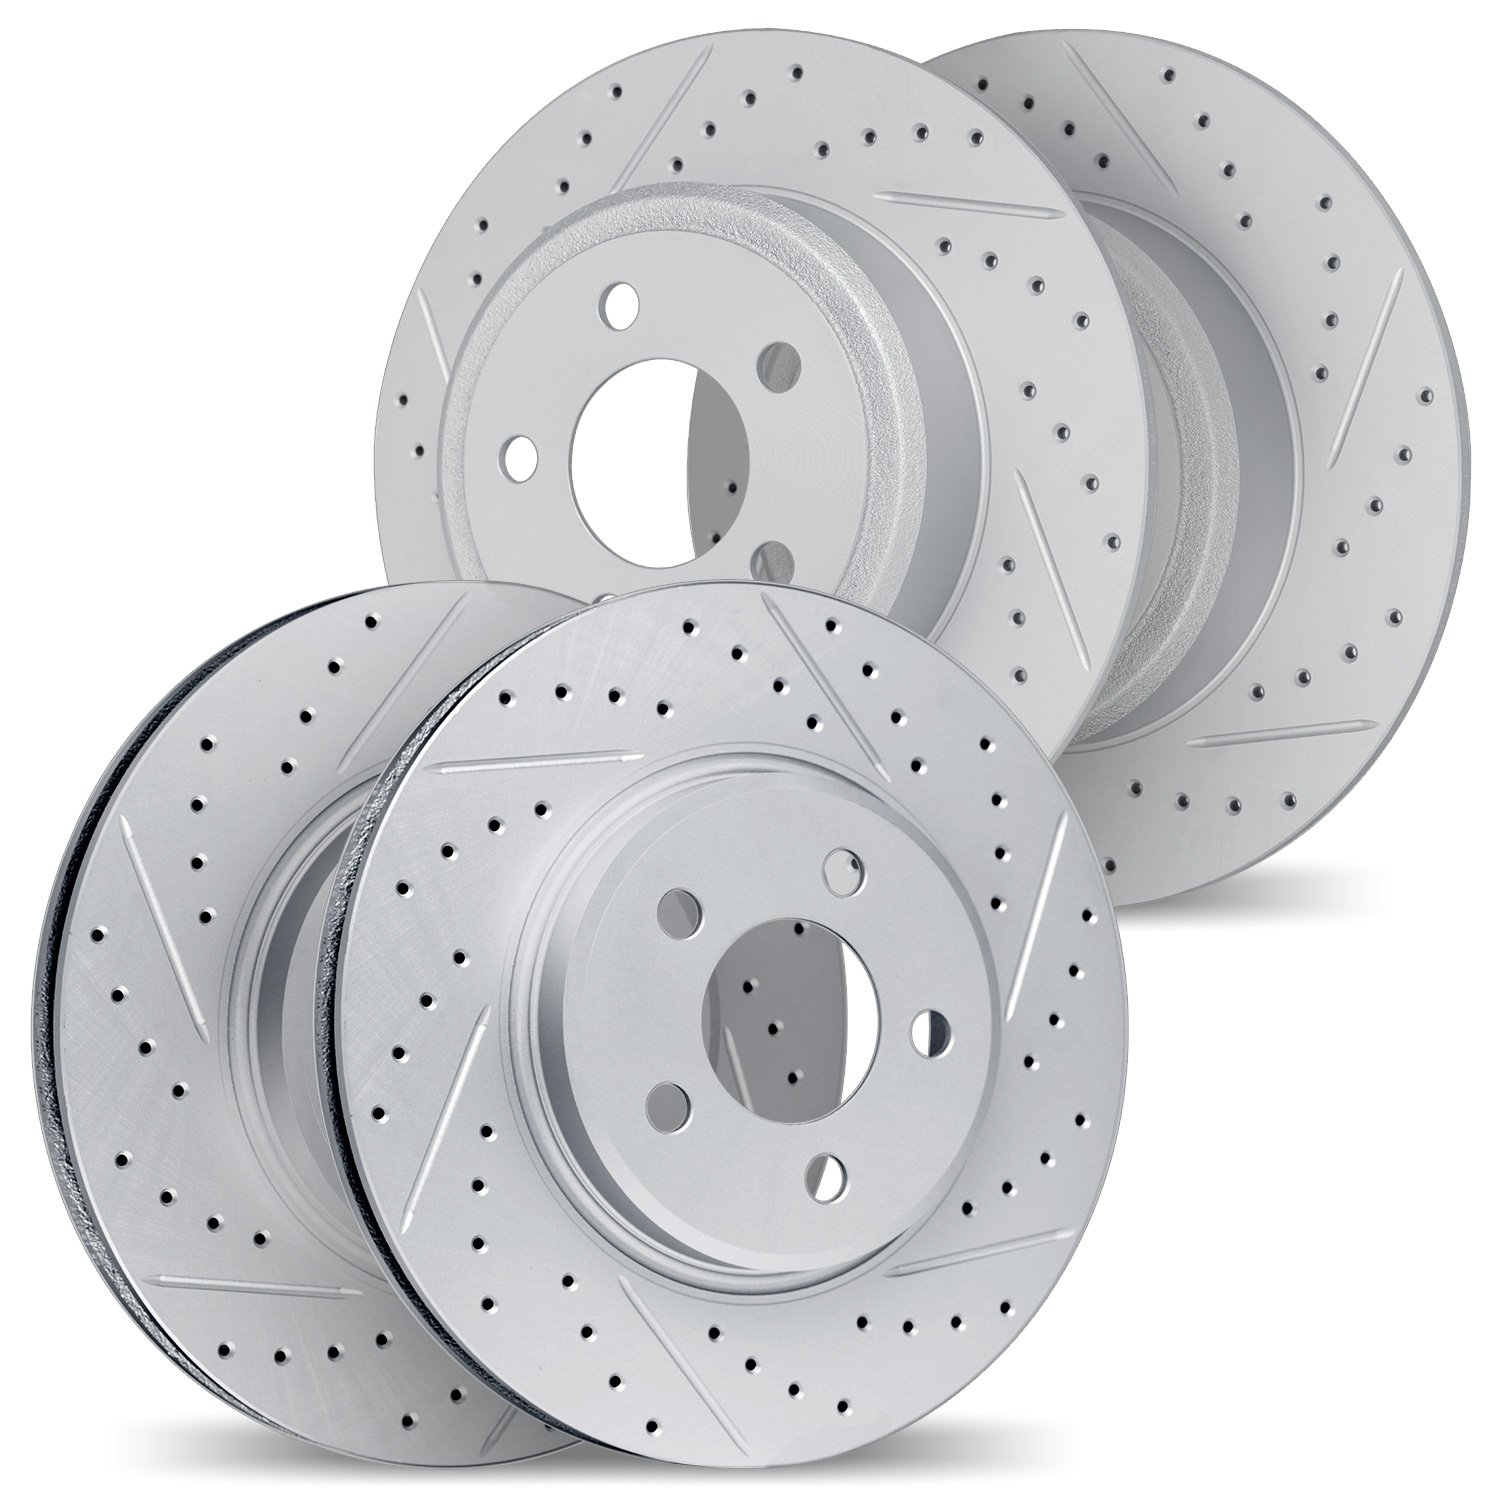 2004-53004 Geoperformance Drilled/Slotted Brake Rotors, 2006-2010 GM, Position: Front and Rear